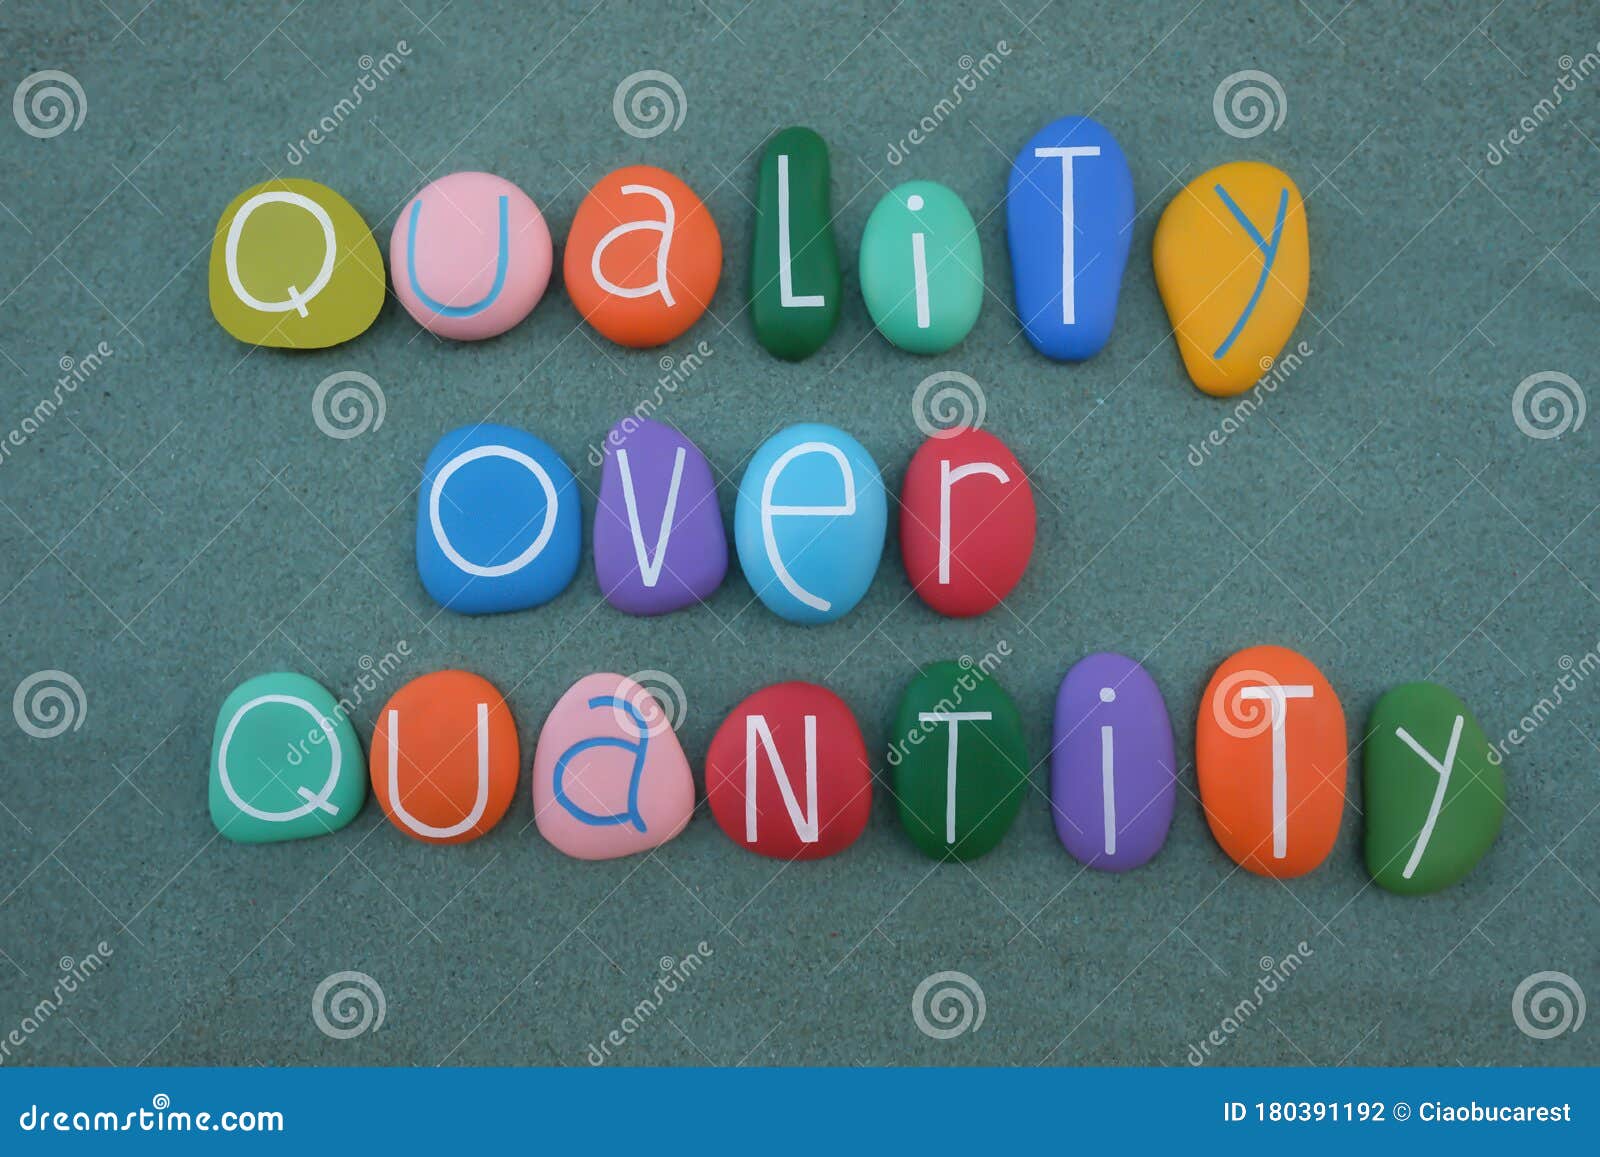 Quality Over Quantity, Conceptual Phrase Composed with Multi ...